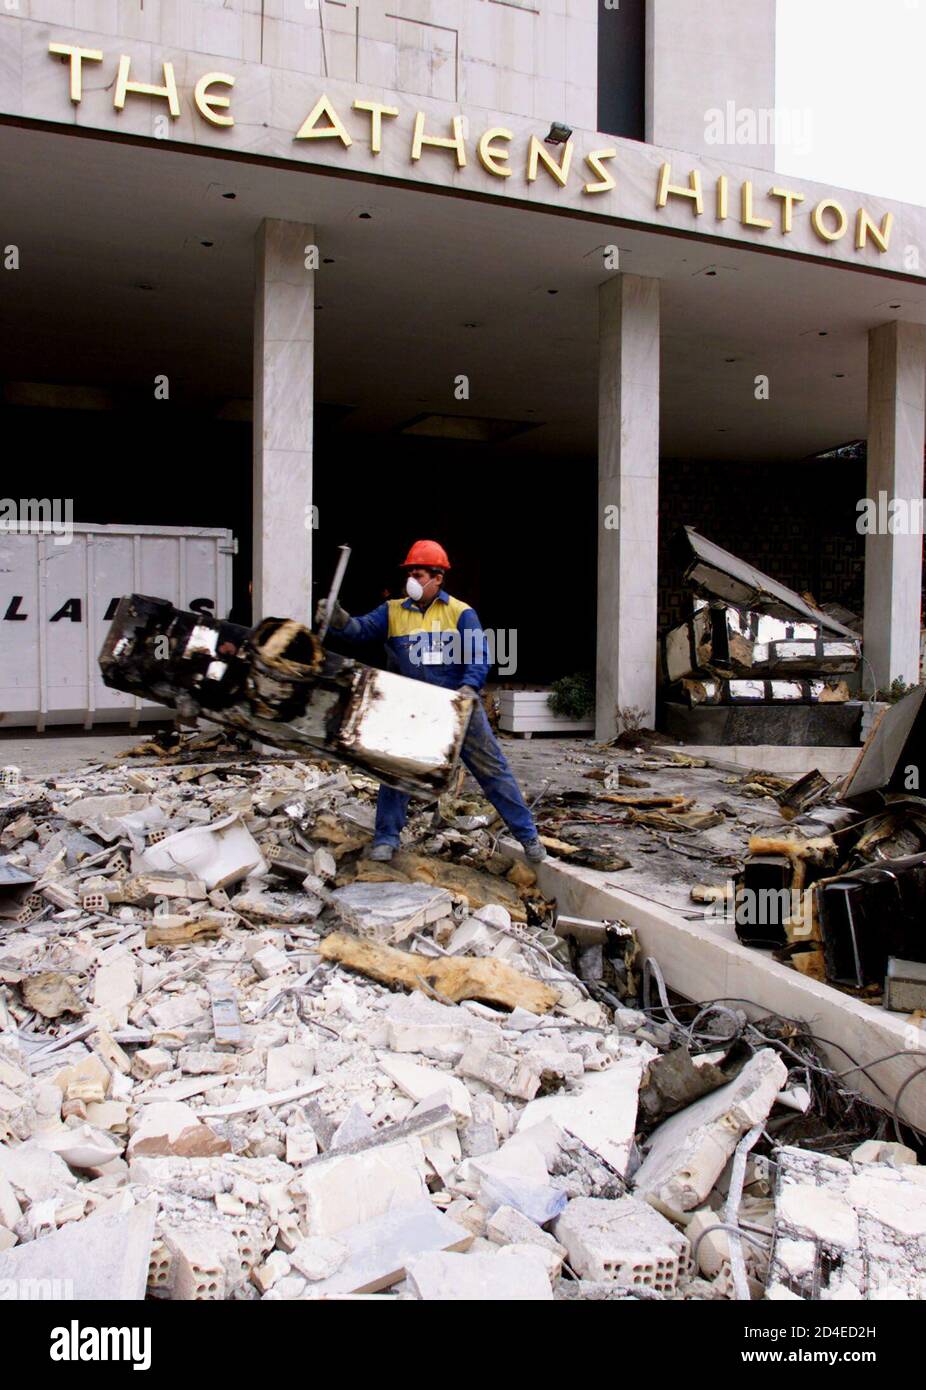 A construction worker clears unwanted objects in front of the main entrance of Athens' Hilton hotel December 5, 2001. The Hilton hotel closed last week for major renovation in time for the Athens 2004 Olympiad and is expected to reopen on December 2002. Athens' other landmark hotel, the Grande Bretagne, has also shut down for renovation. REUTERS/Yiorgos Karahalis REUTERS  YK Stock Photo